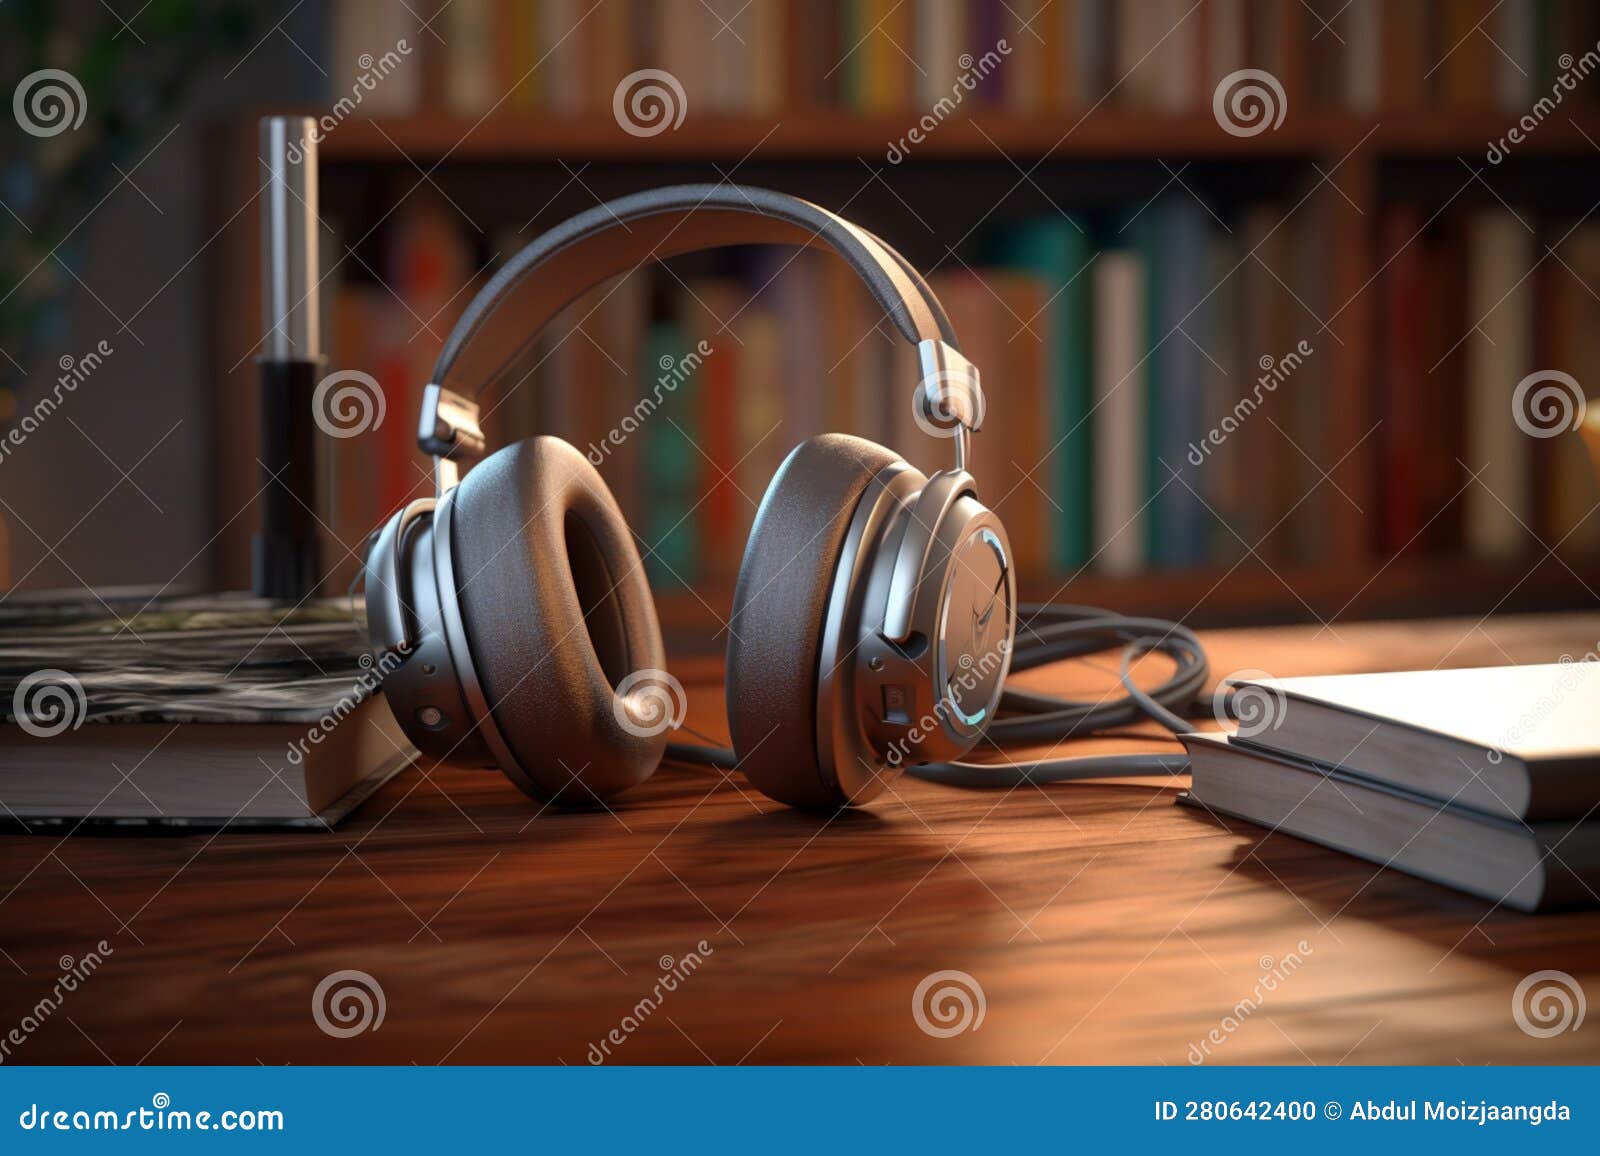 aural exploration of literature, books and headphones on wooden table